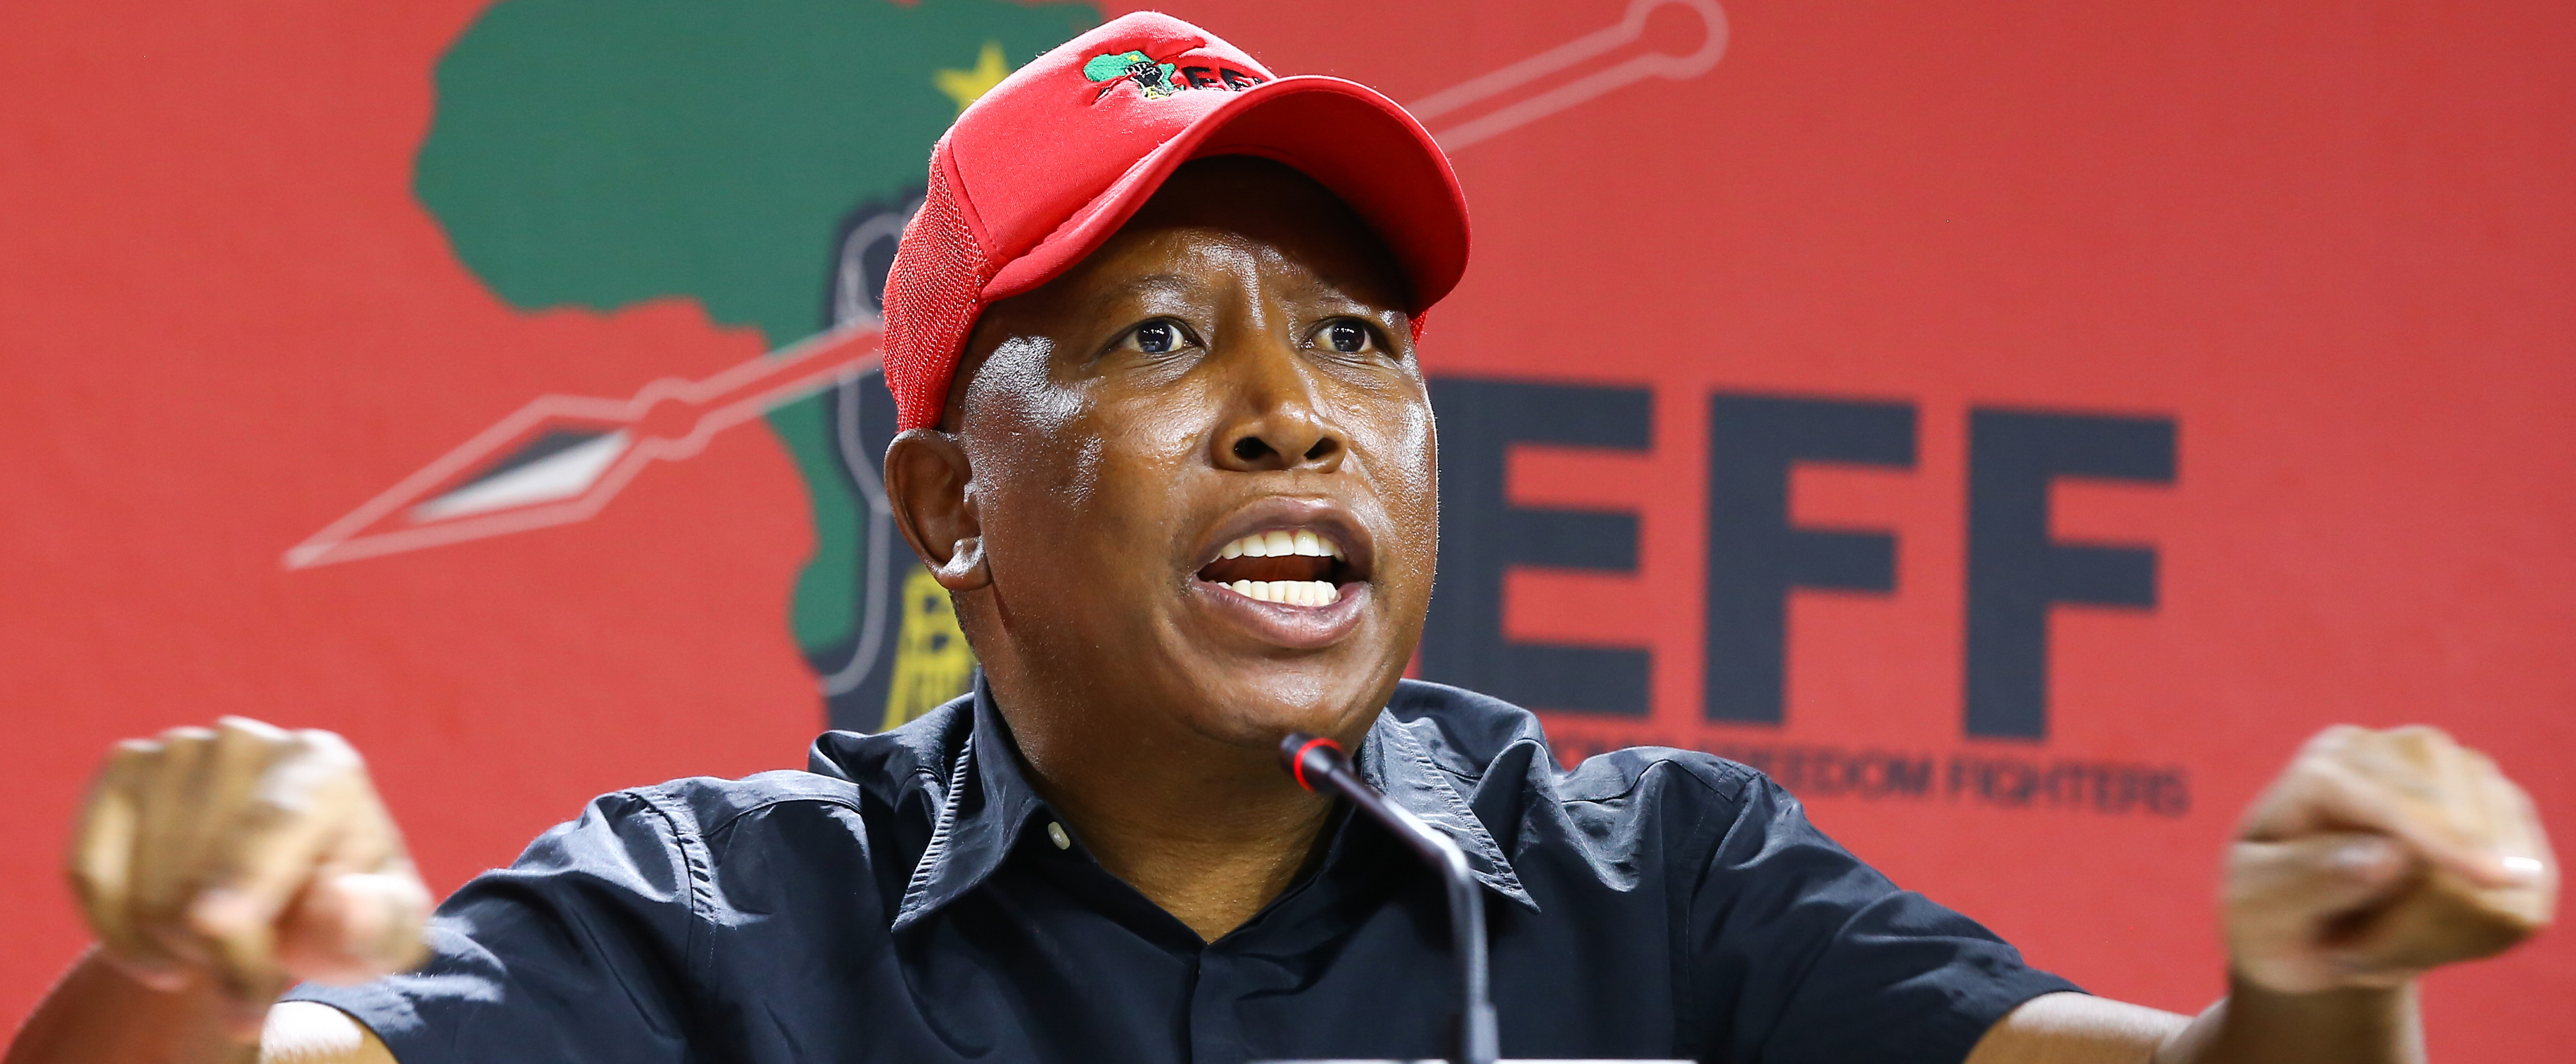 Malema’s stern warning to corrupt members: You will rue the day you joined the EFF